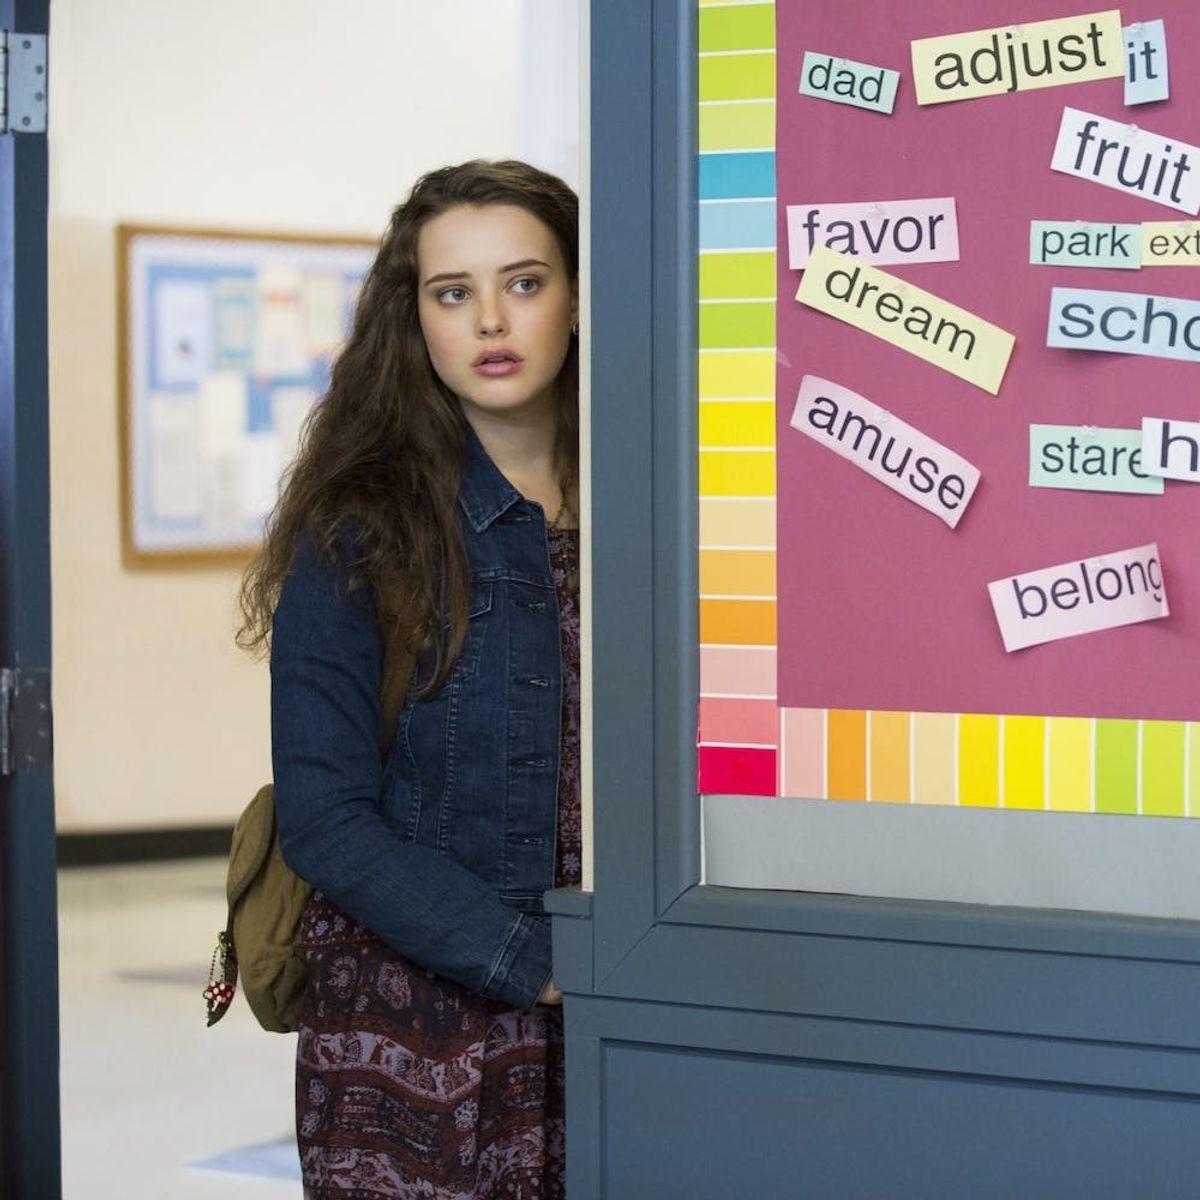 Netflix Has Released a Study on the Effects of Their Hit Show ’13 Reasons Why’ and How We Relate to It